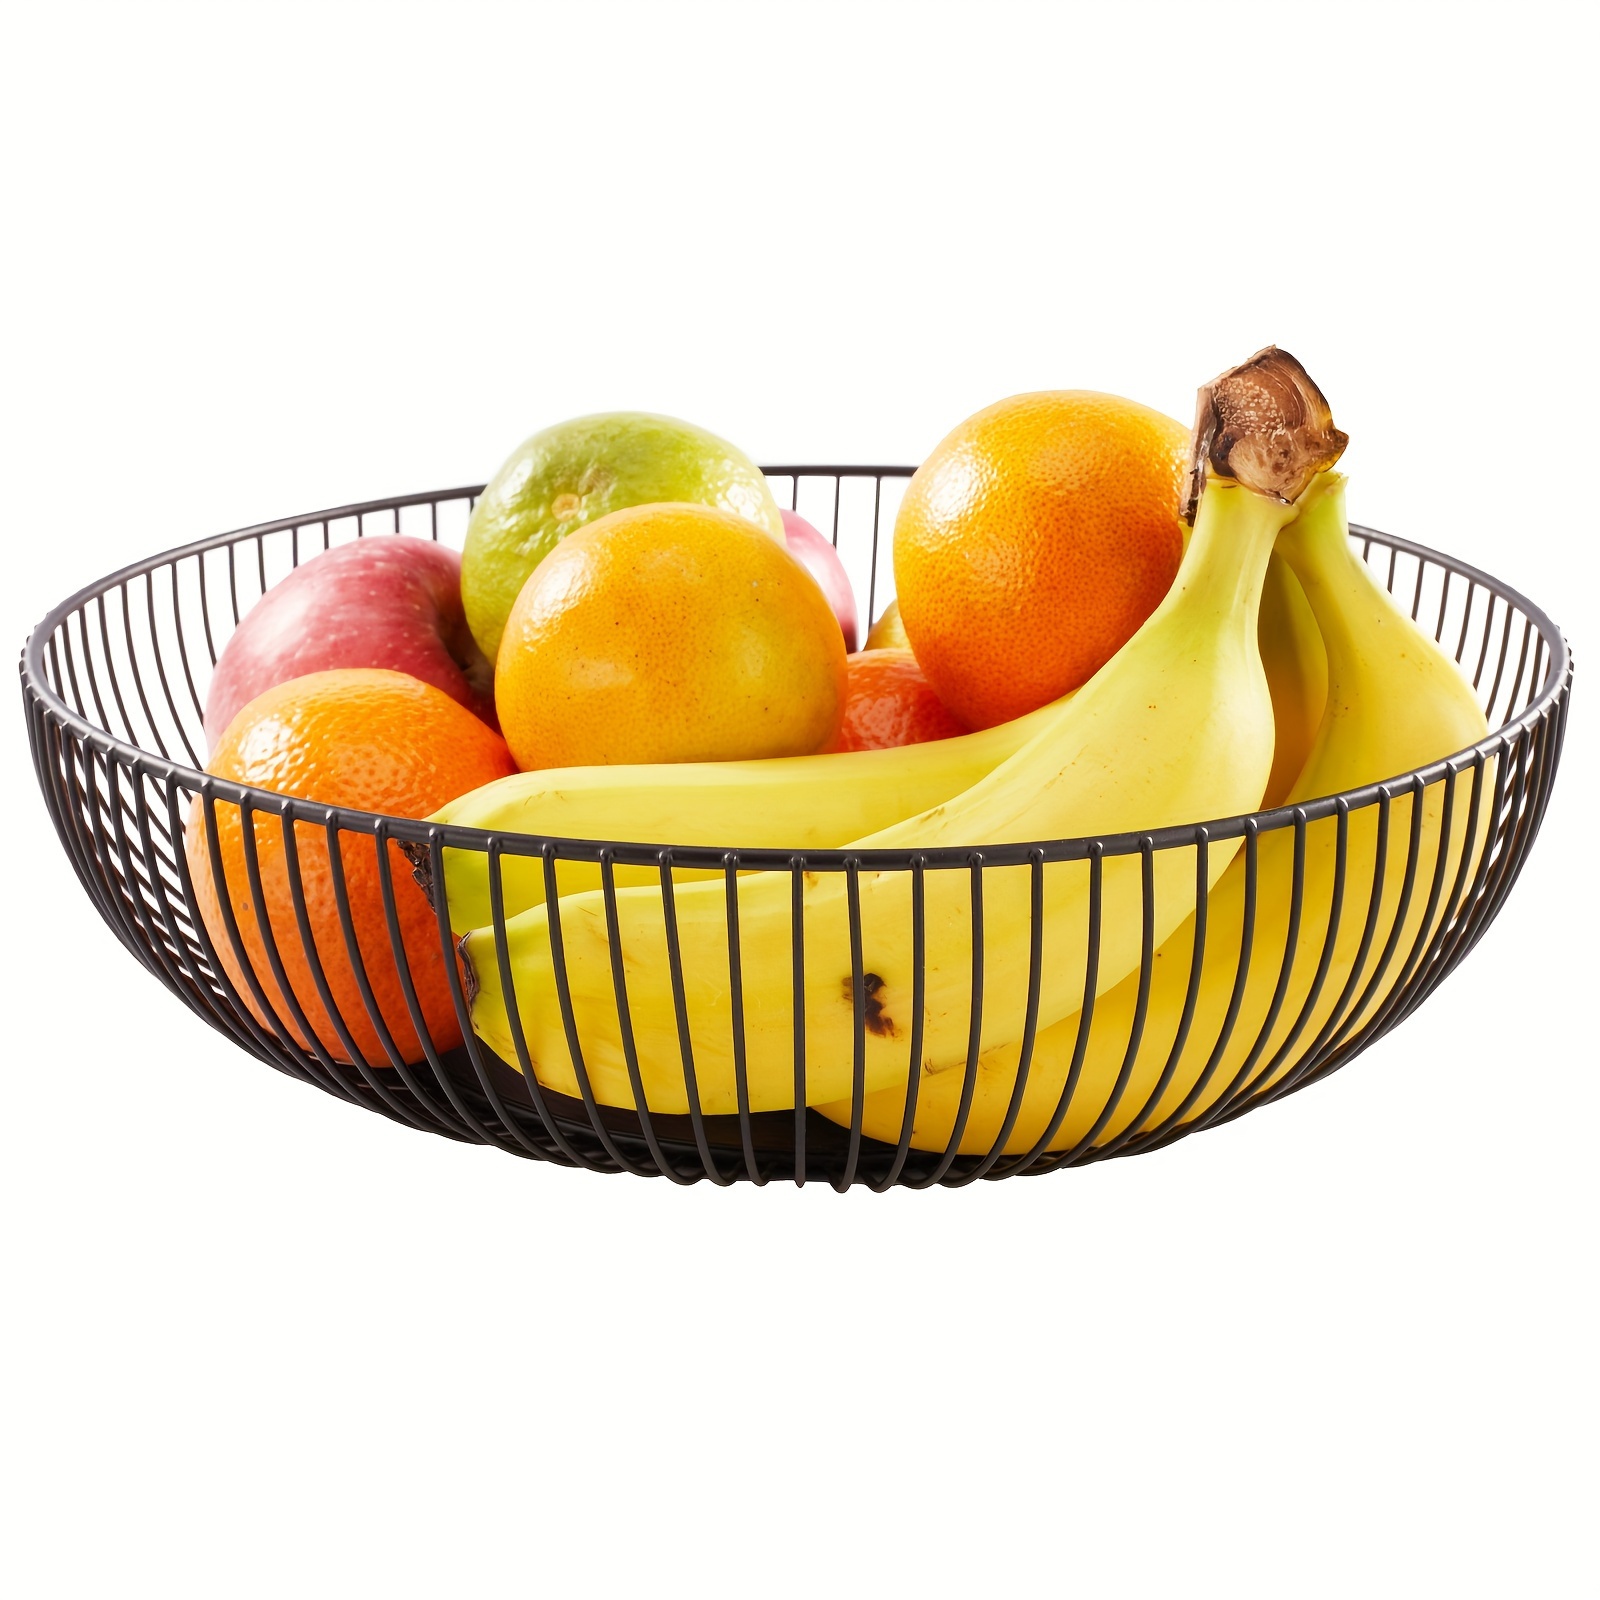 

1pc Fruit Bowl And Fruit Basket Organizer For Kitchen Countertop, Fruit And Vegetable Basket, Banana Container, Metal Storage Rack, Home Storage & Organization, Kitchen Accessories